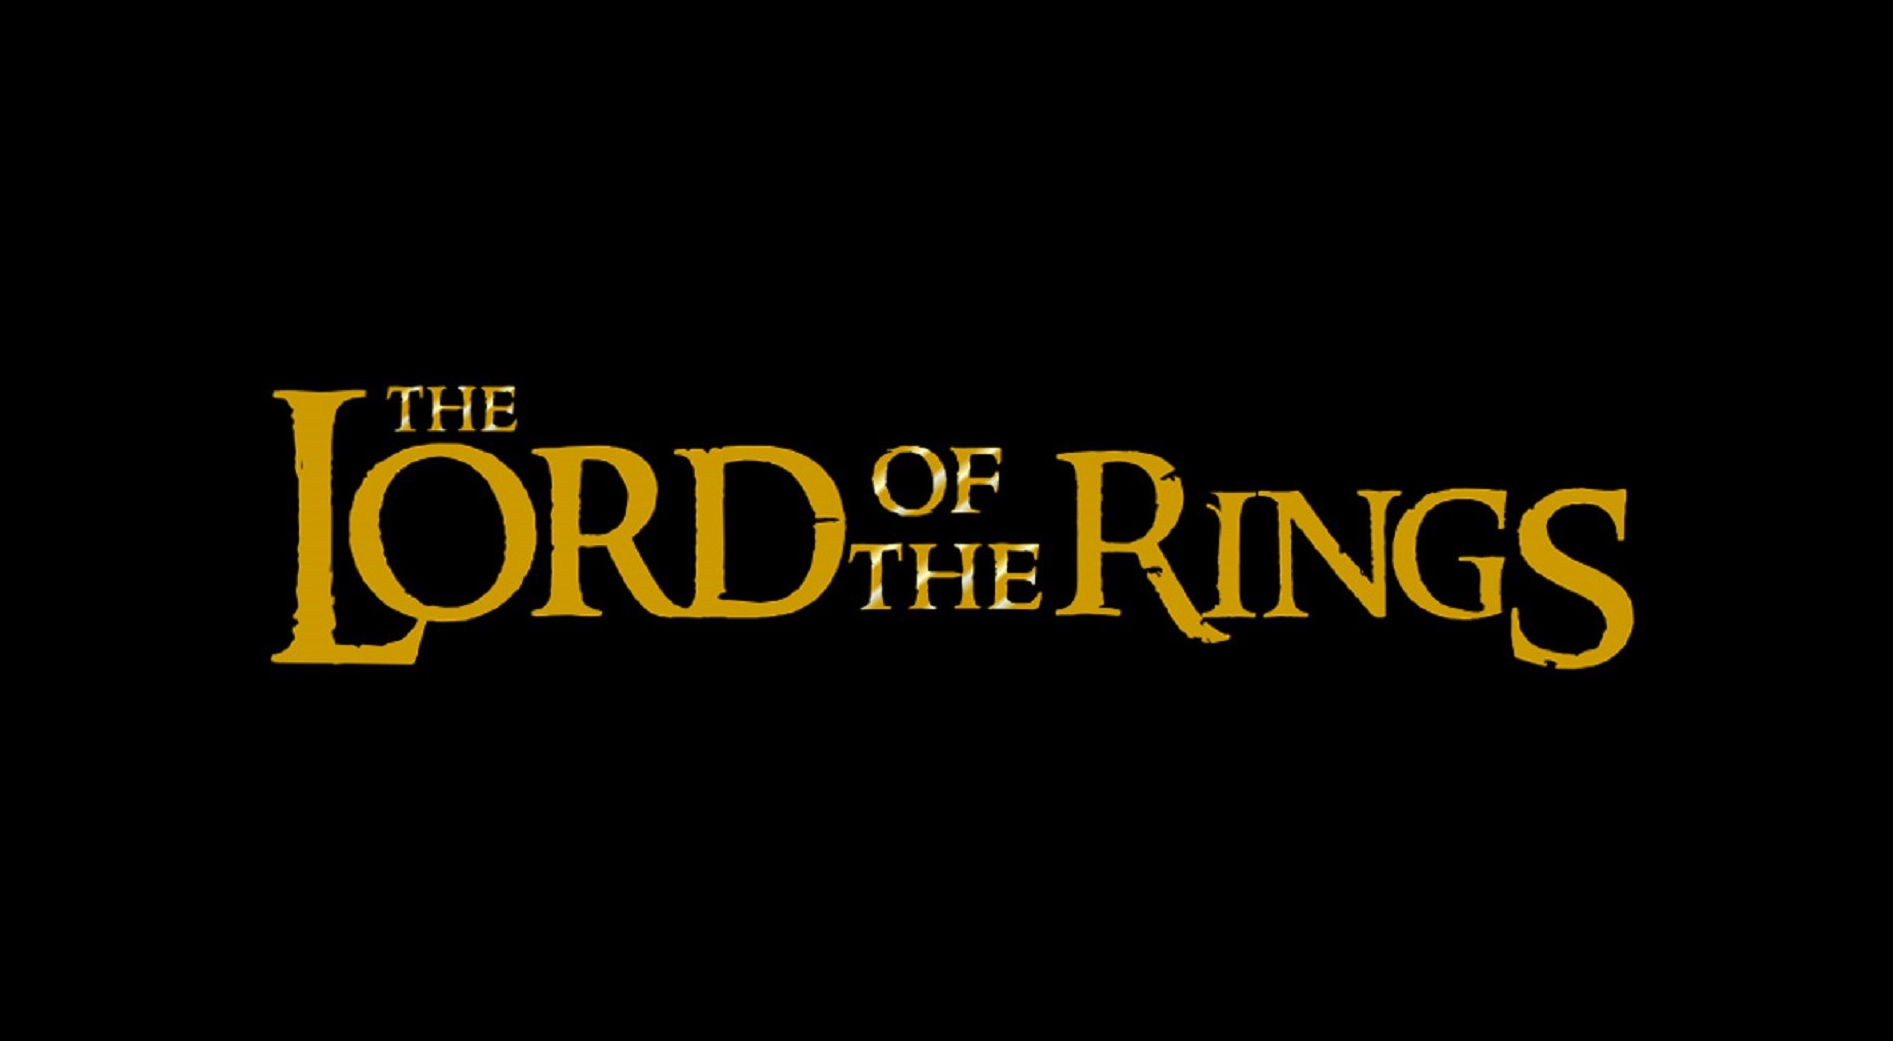 ip-the-lord-of-the-rings-5-2023-24